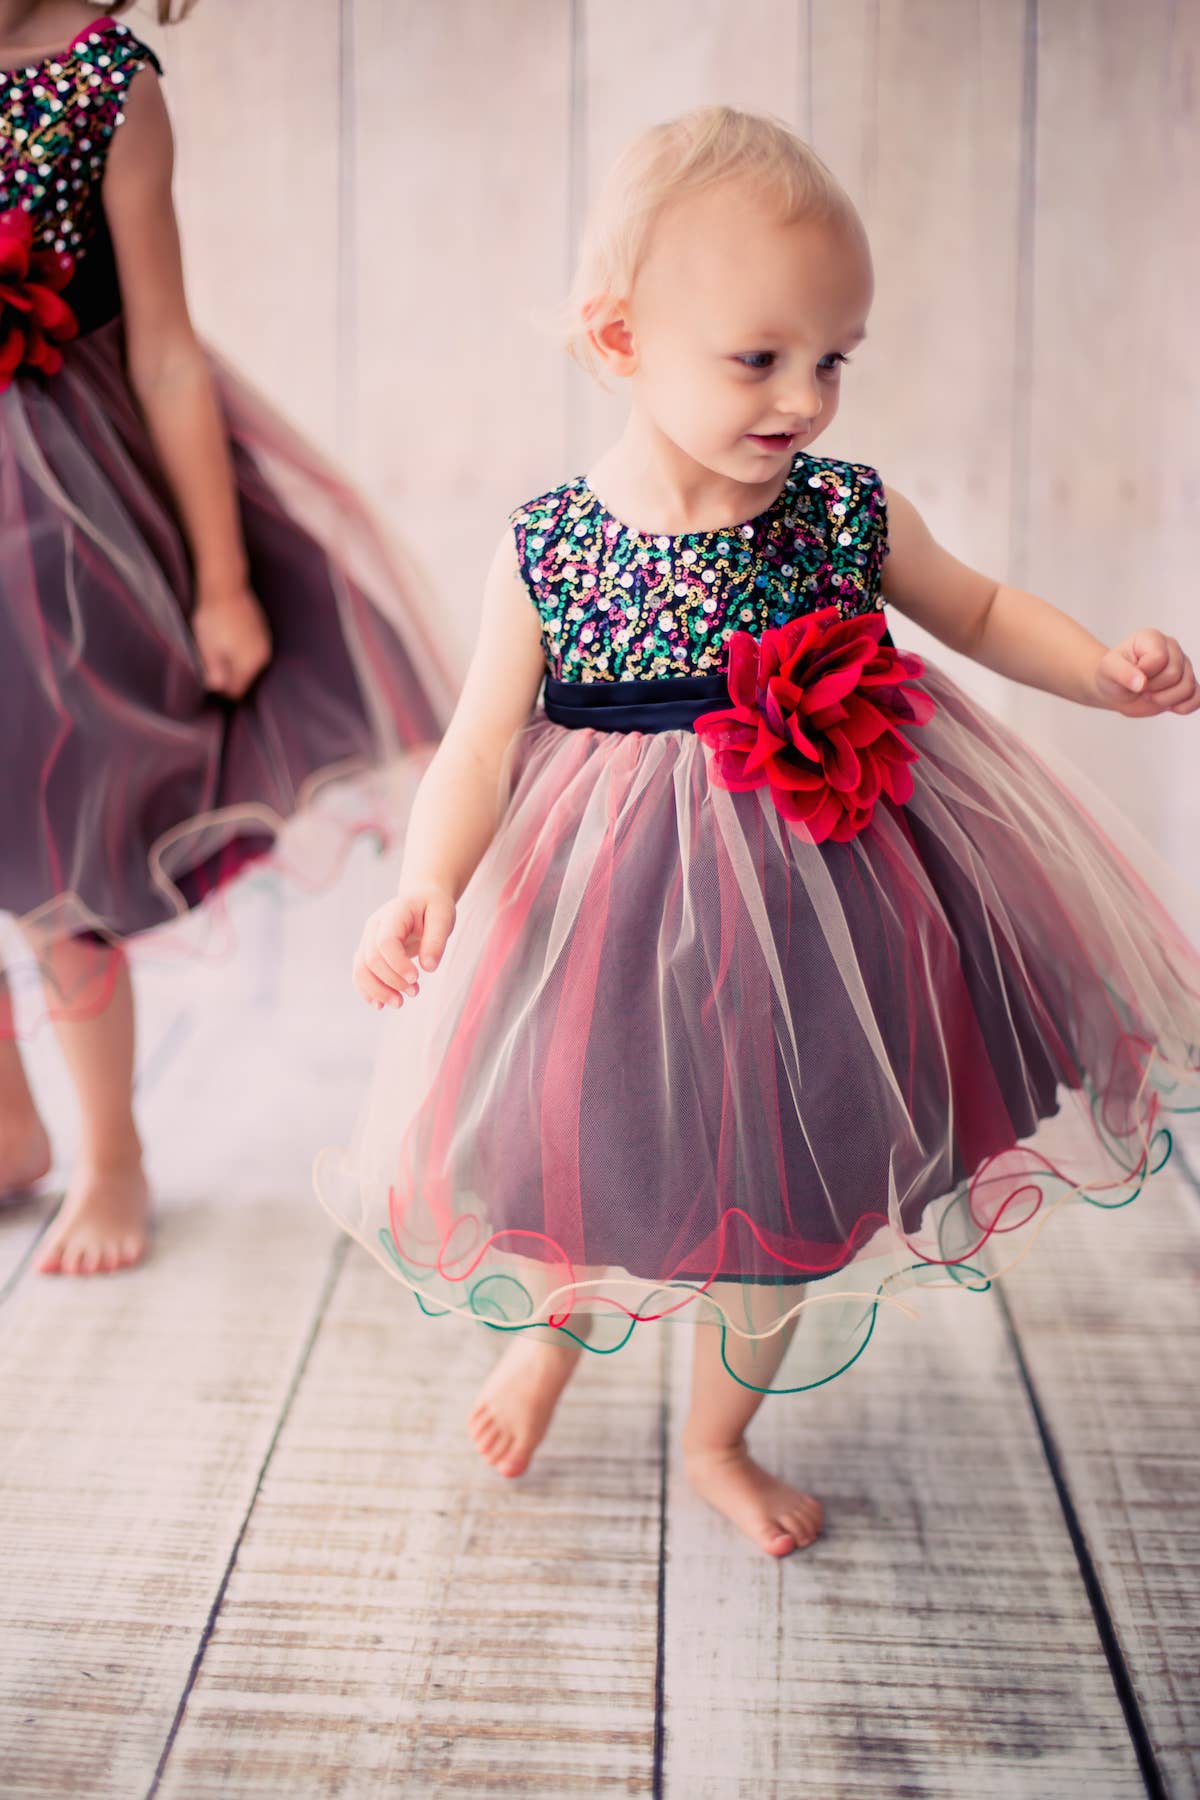 Kids Black & Turquoise Tulle Dress Flower Girl Dress Wedding Party Birthday  Party Photo Shoot Special Occasion Formal Dress - Etsy